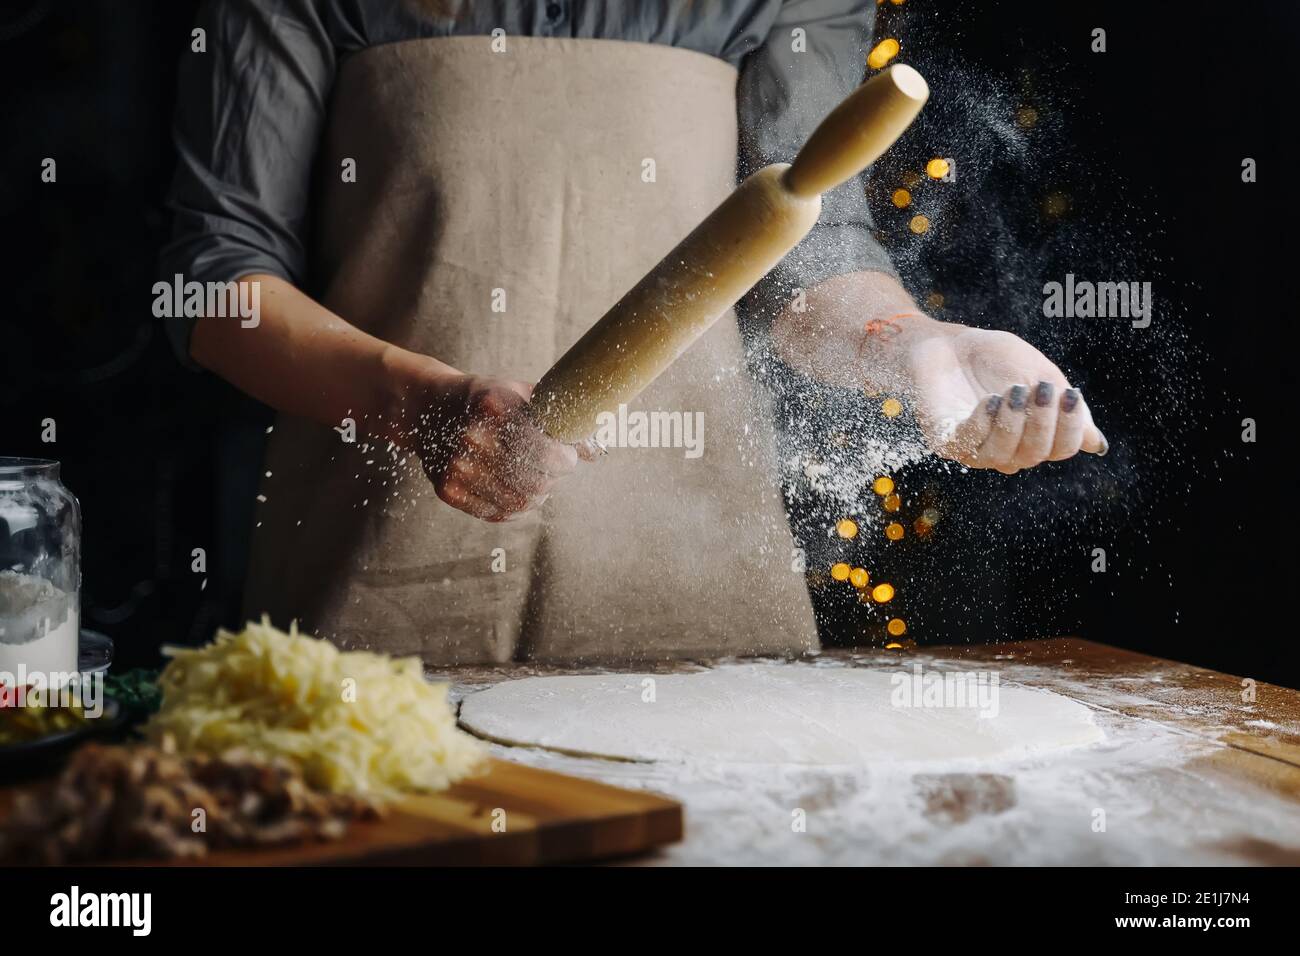 Home Made Pizza Cooking. Woman hands keep rolling pin with flour on dark brown table. Food preparing concept under quarantine due to epidemic. Stock Photo